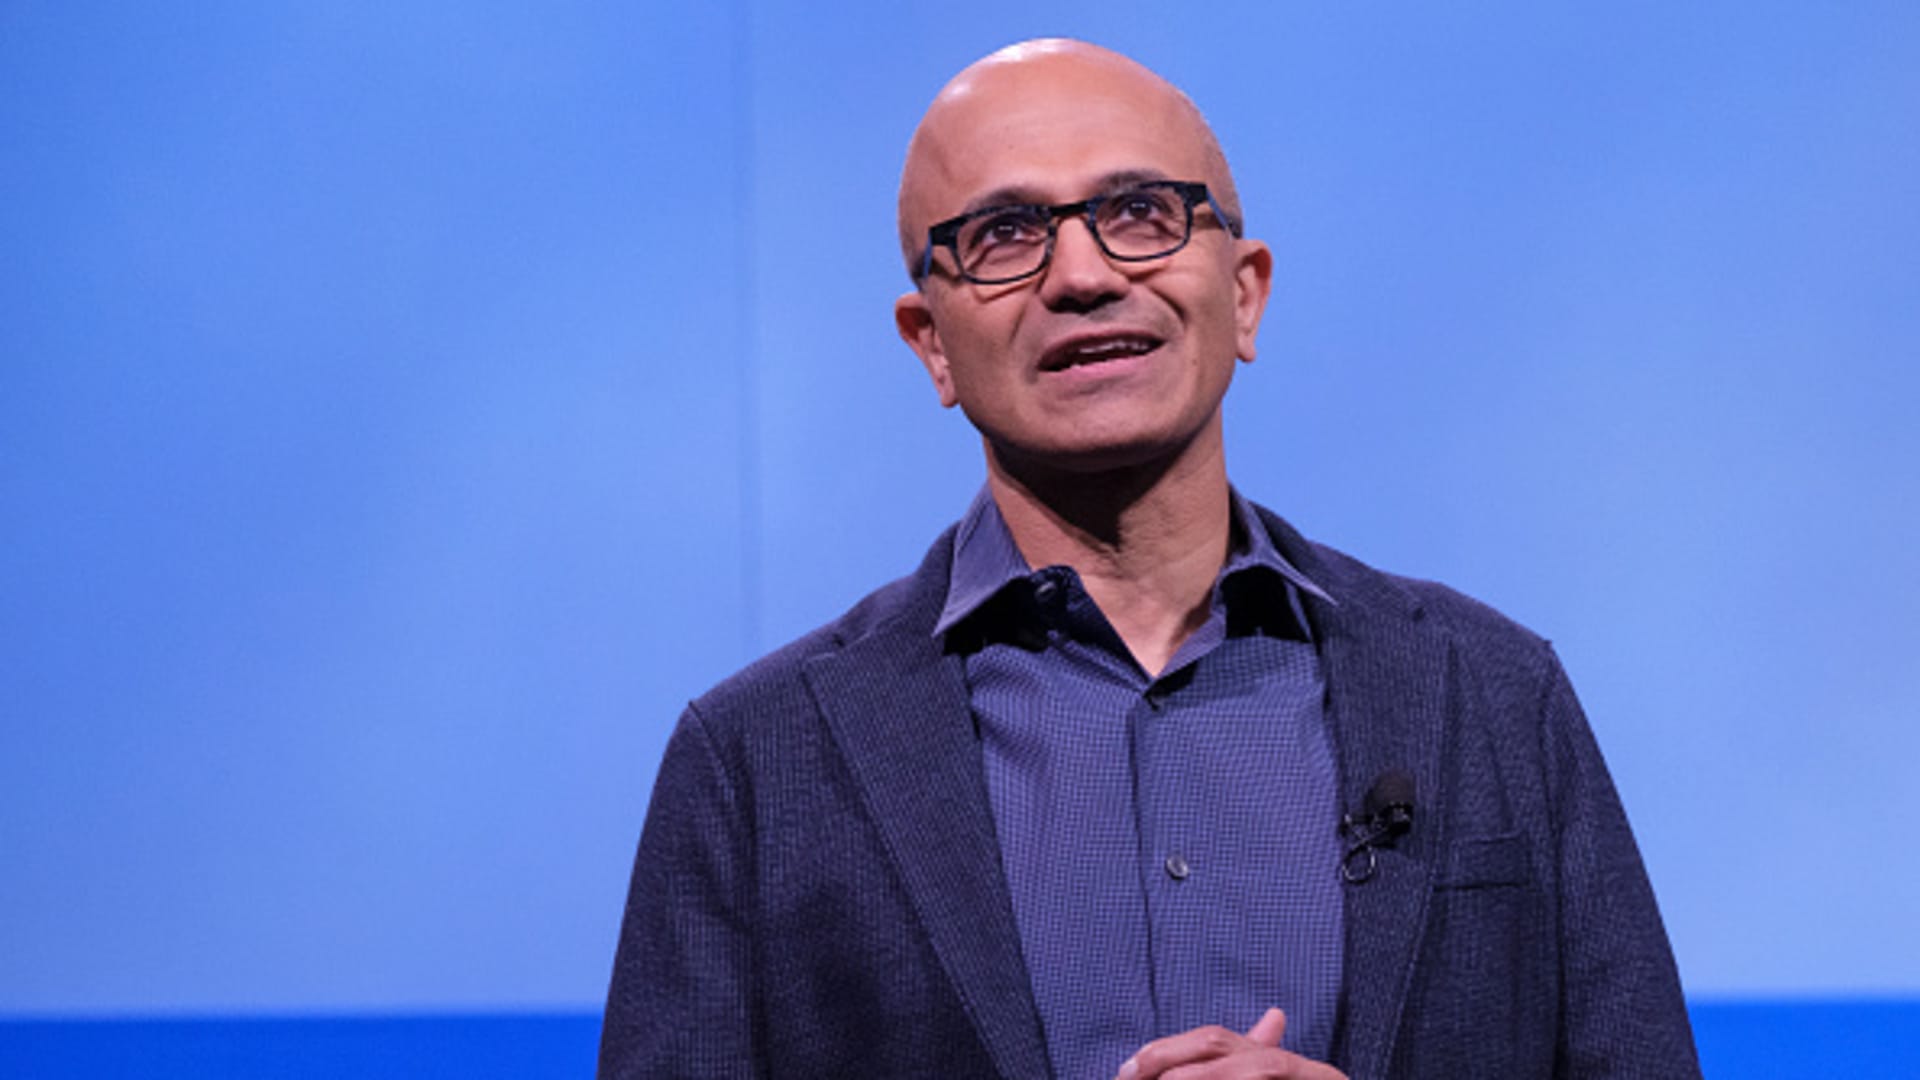 Microsoft CEO Satya Nadella tells employees that pay increases are on the way